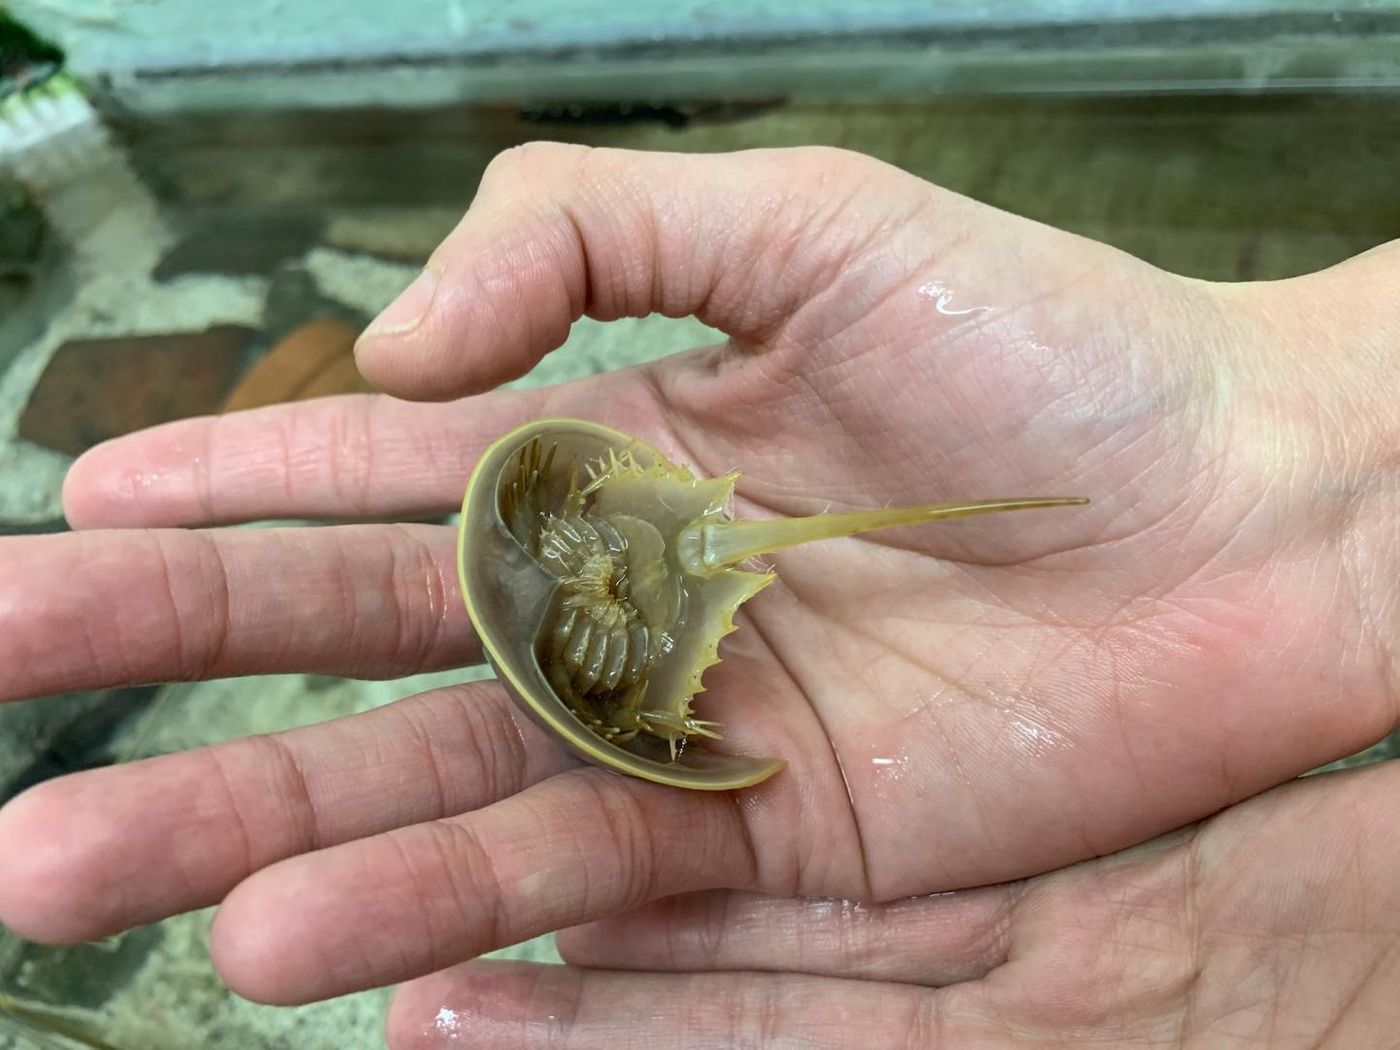 University of Wisconsin-Madison postdoctoral researcher Jesús Ballesteros holds a small horseshoe crab. / Credit: Courtesy of Jesús Ballesteros